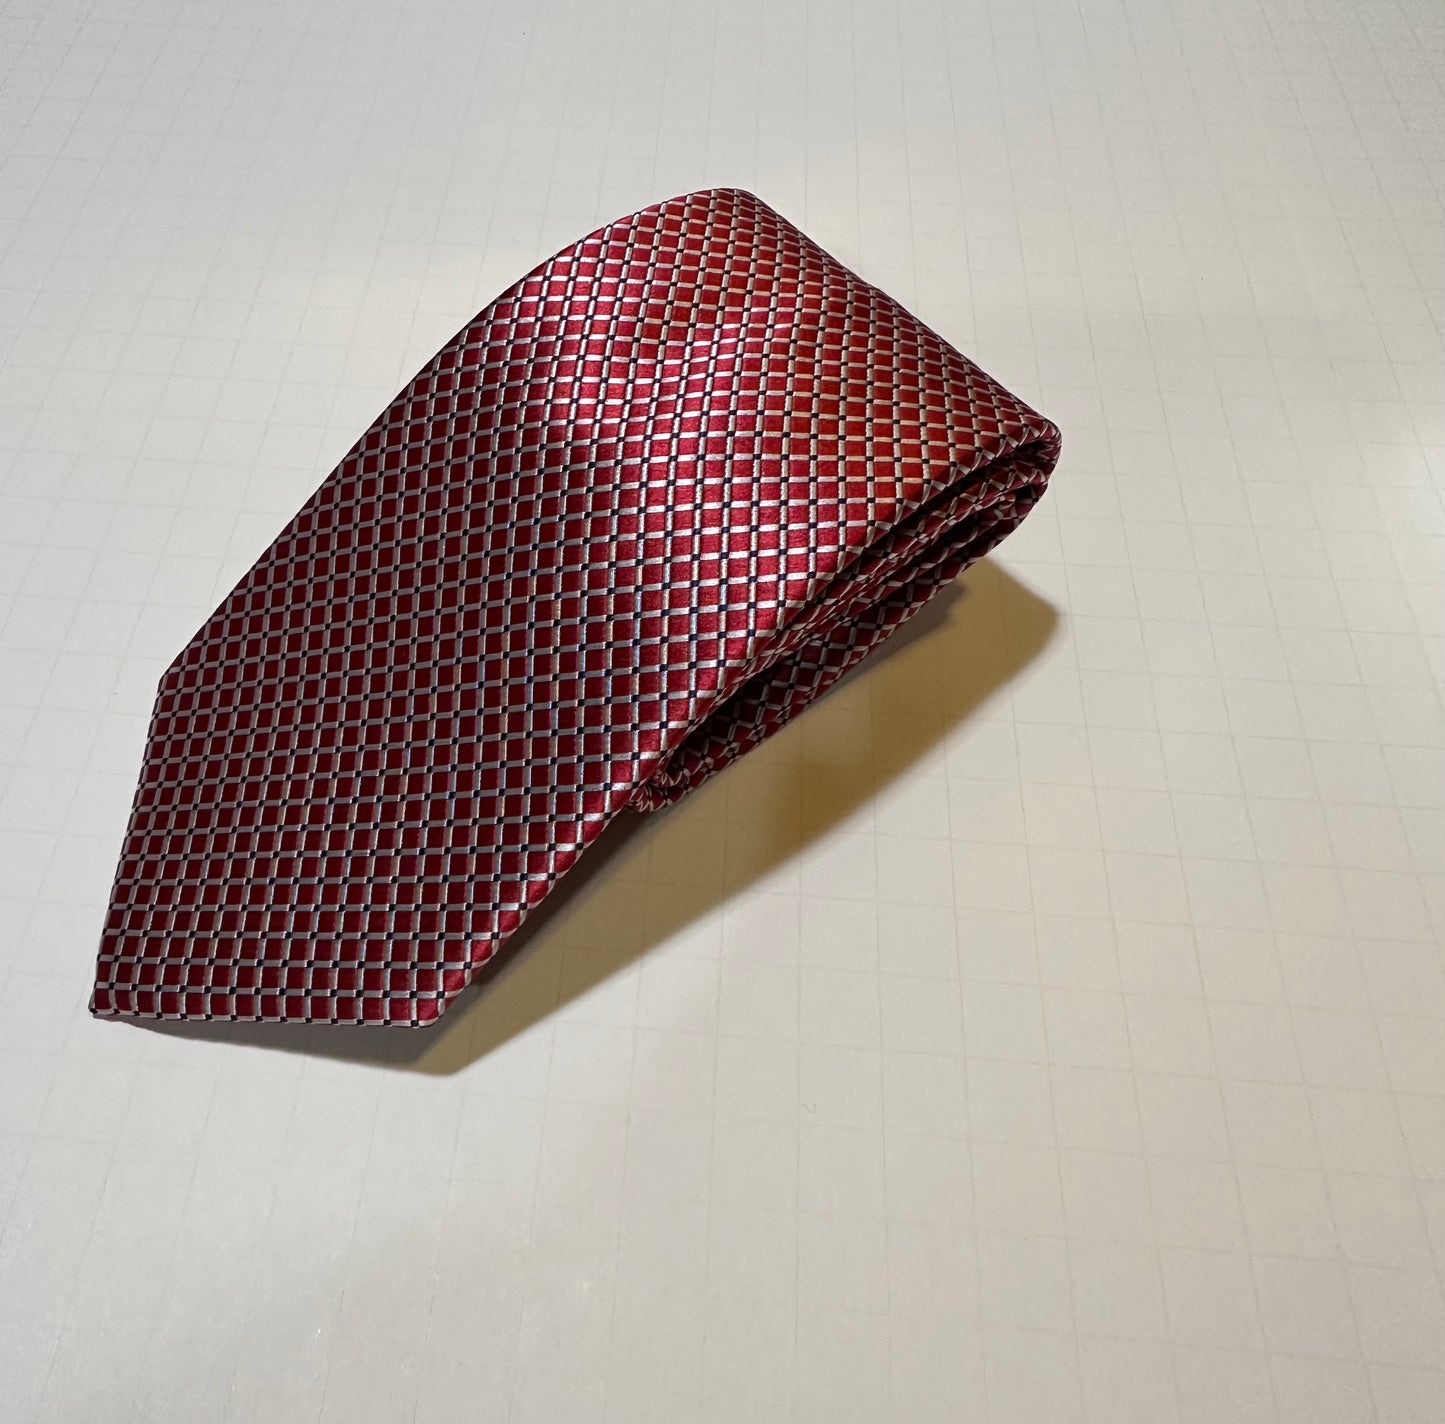 The Shirt Shop Tie Red with Small White/Black Grid